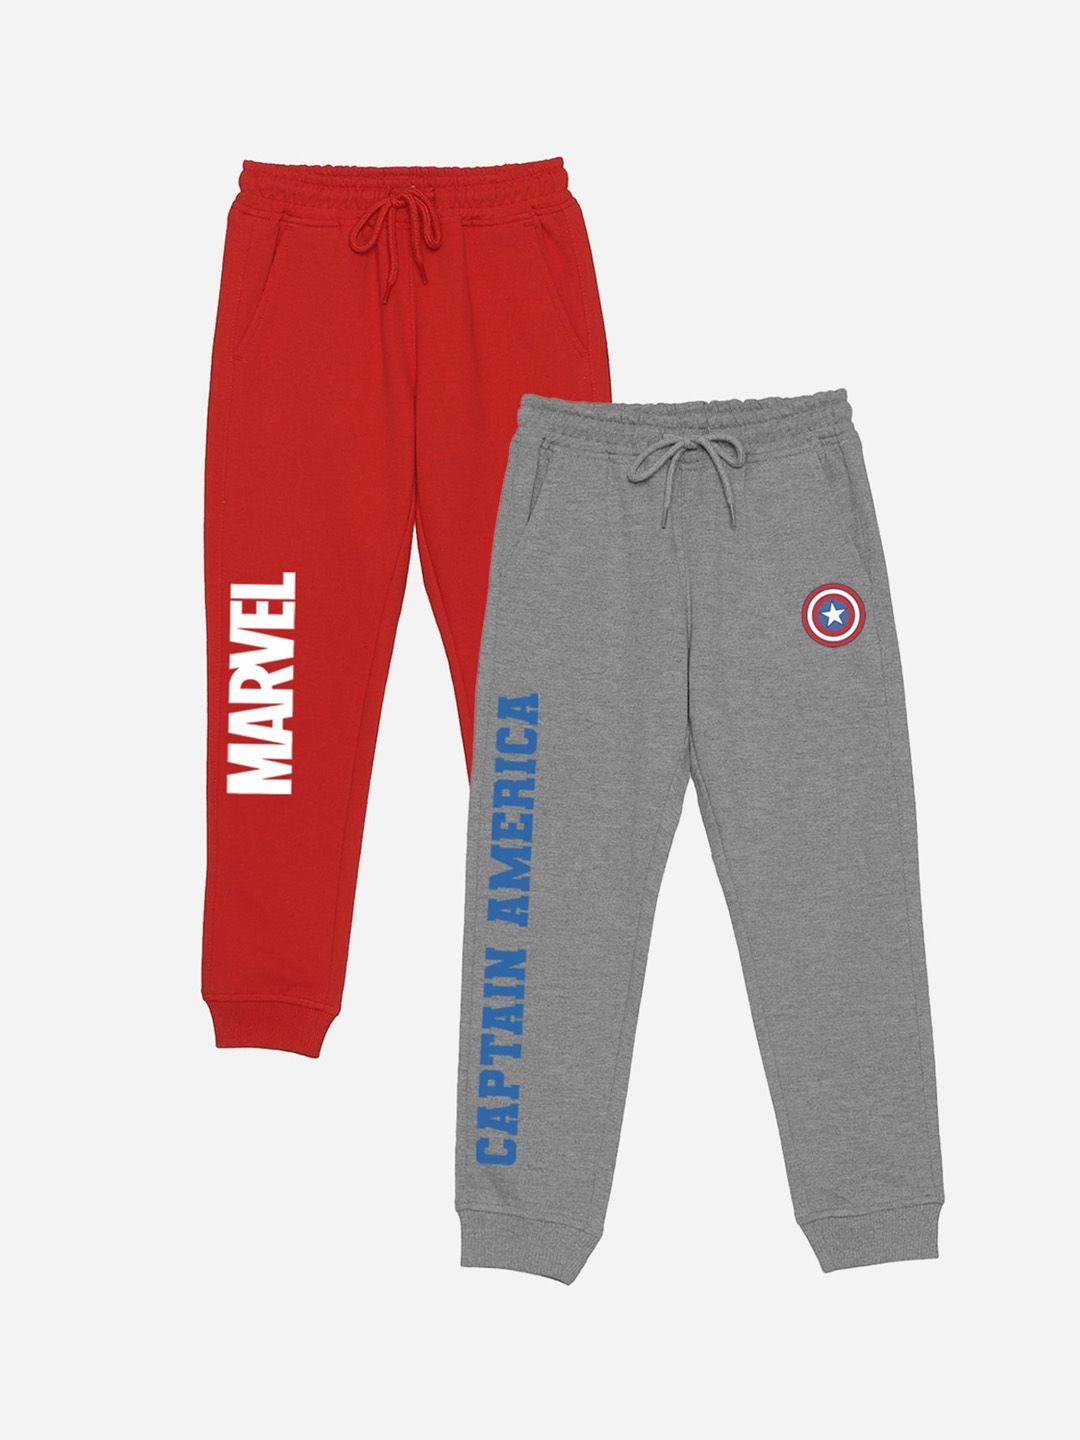 yk marvel boys pack of 2 printed joggers